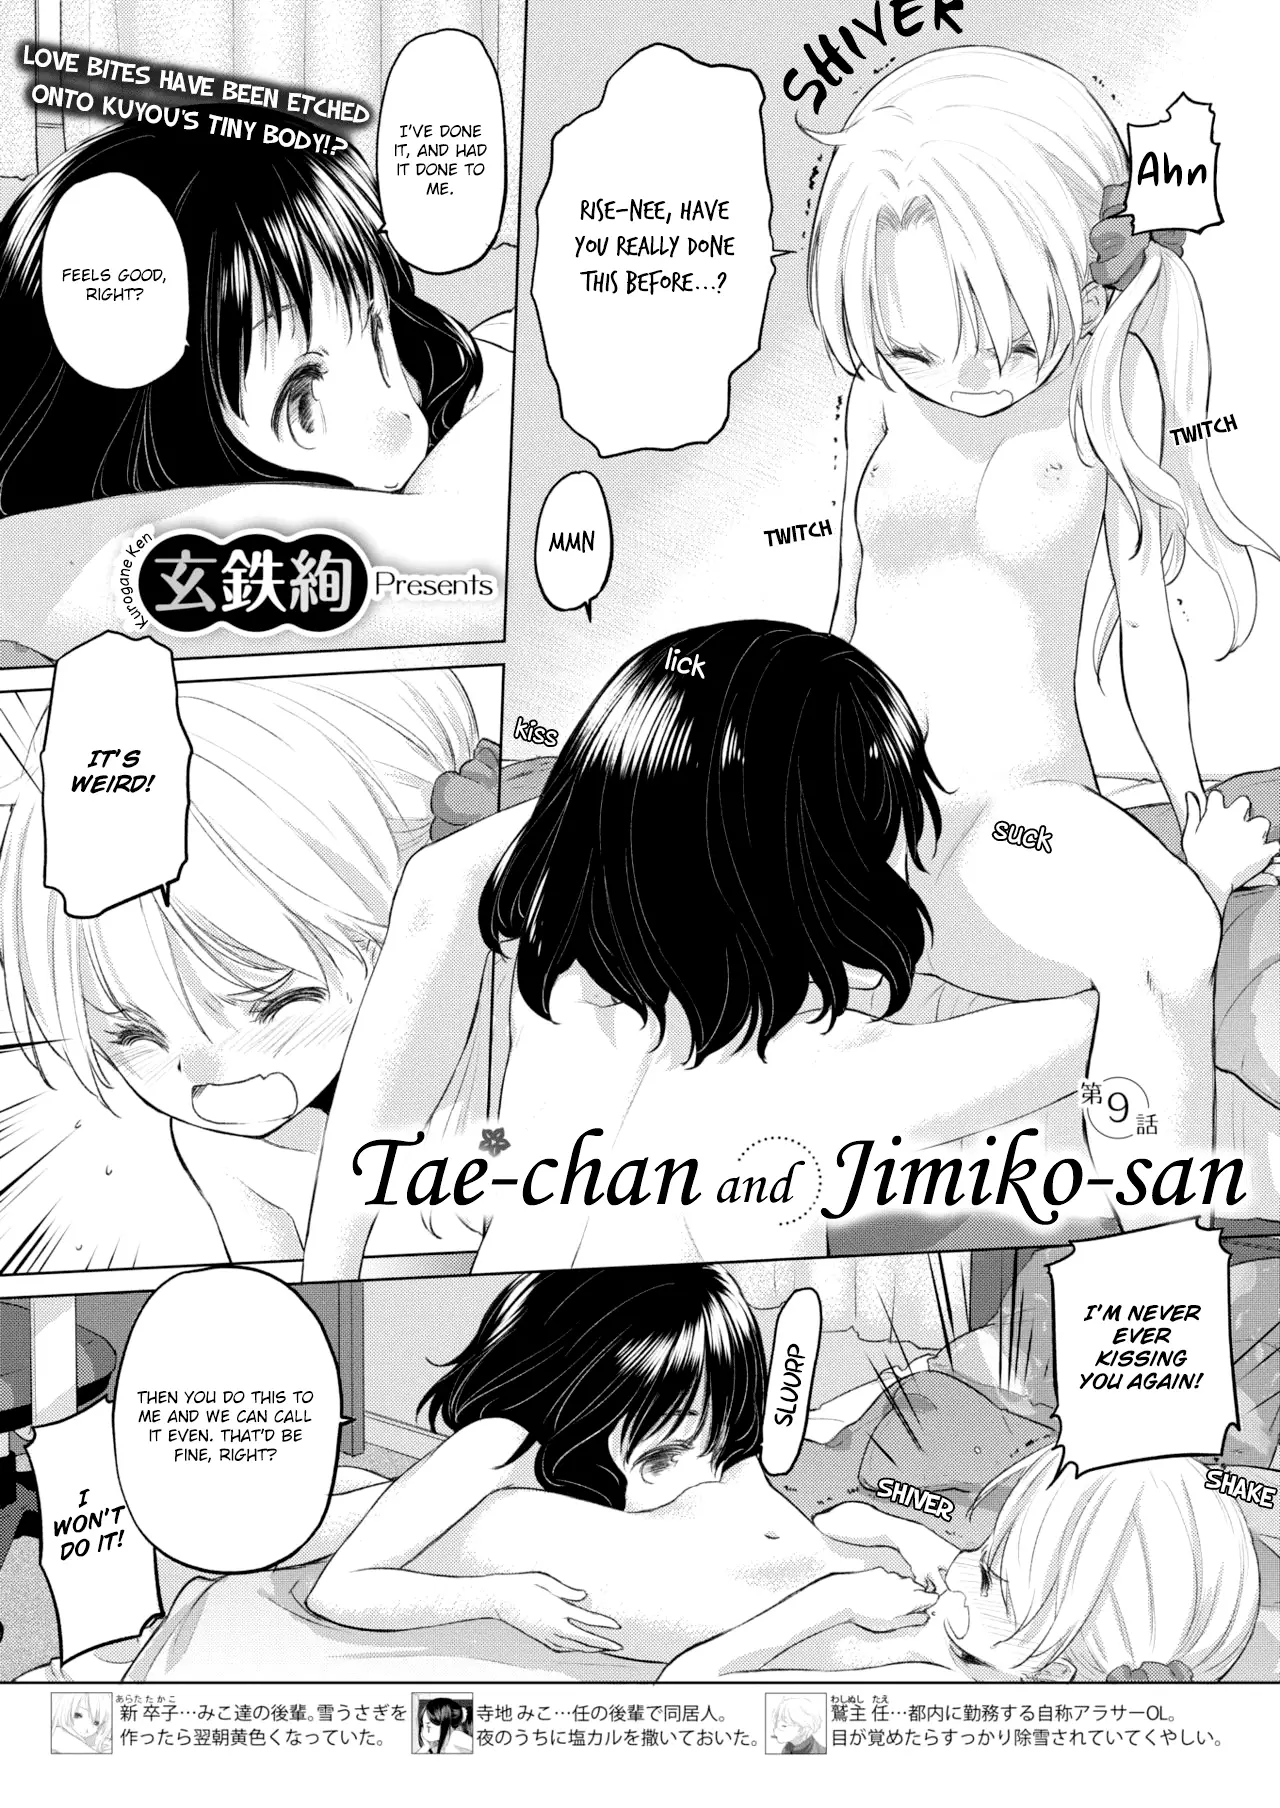 Tae-chan and Jimiko-san - Chapter 9 Page 1